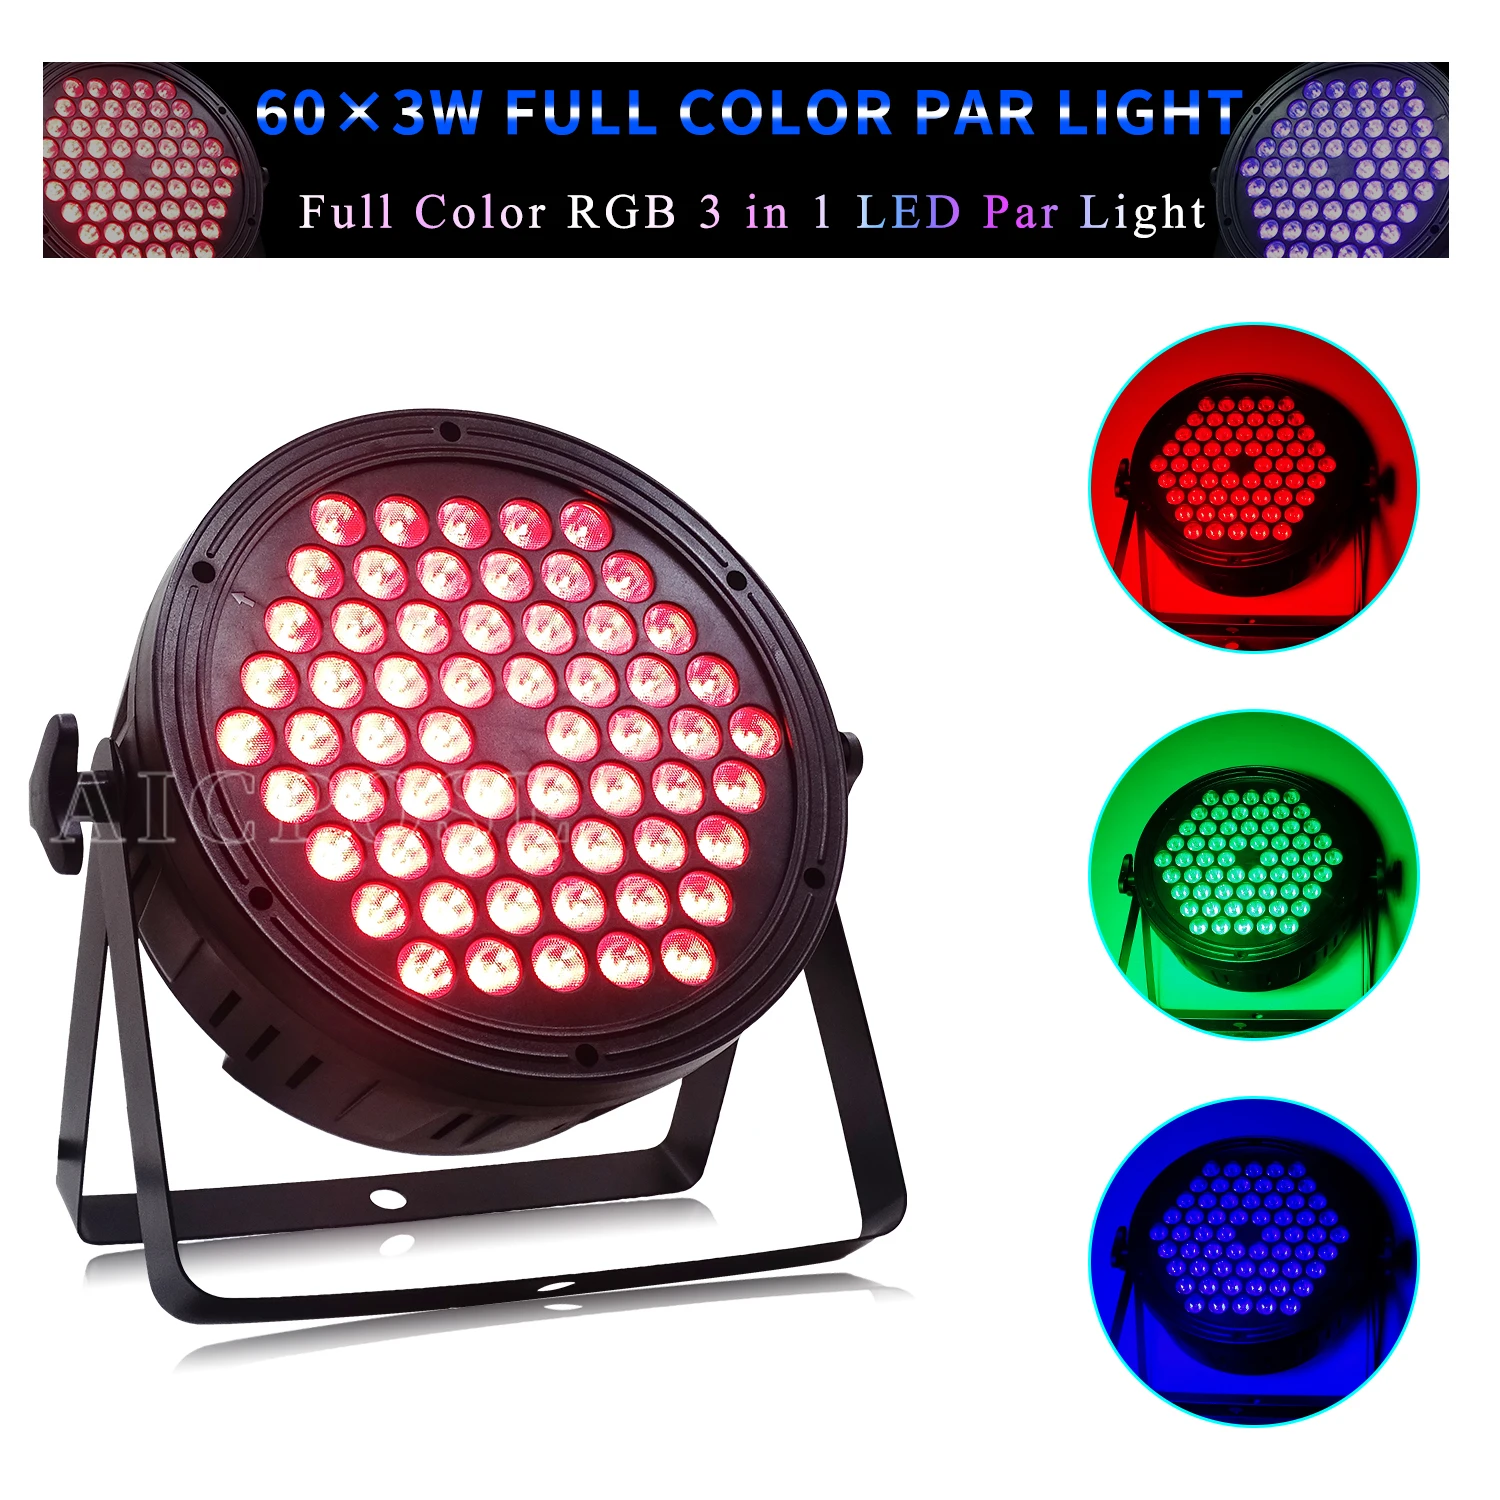 60x3W RGB Full Color 3 in 1 LED Par Light DMX512 Control Stage Background Dyeing Effect For Dance Studio Club DJ Disco Party